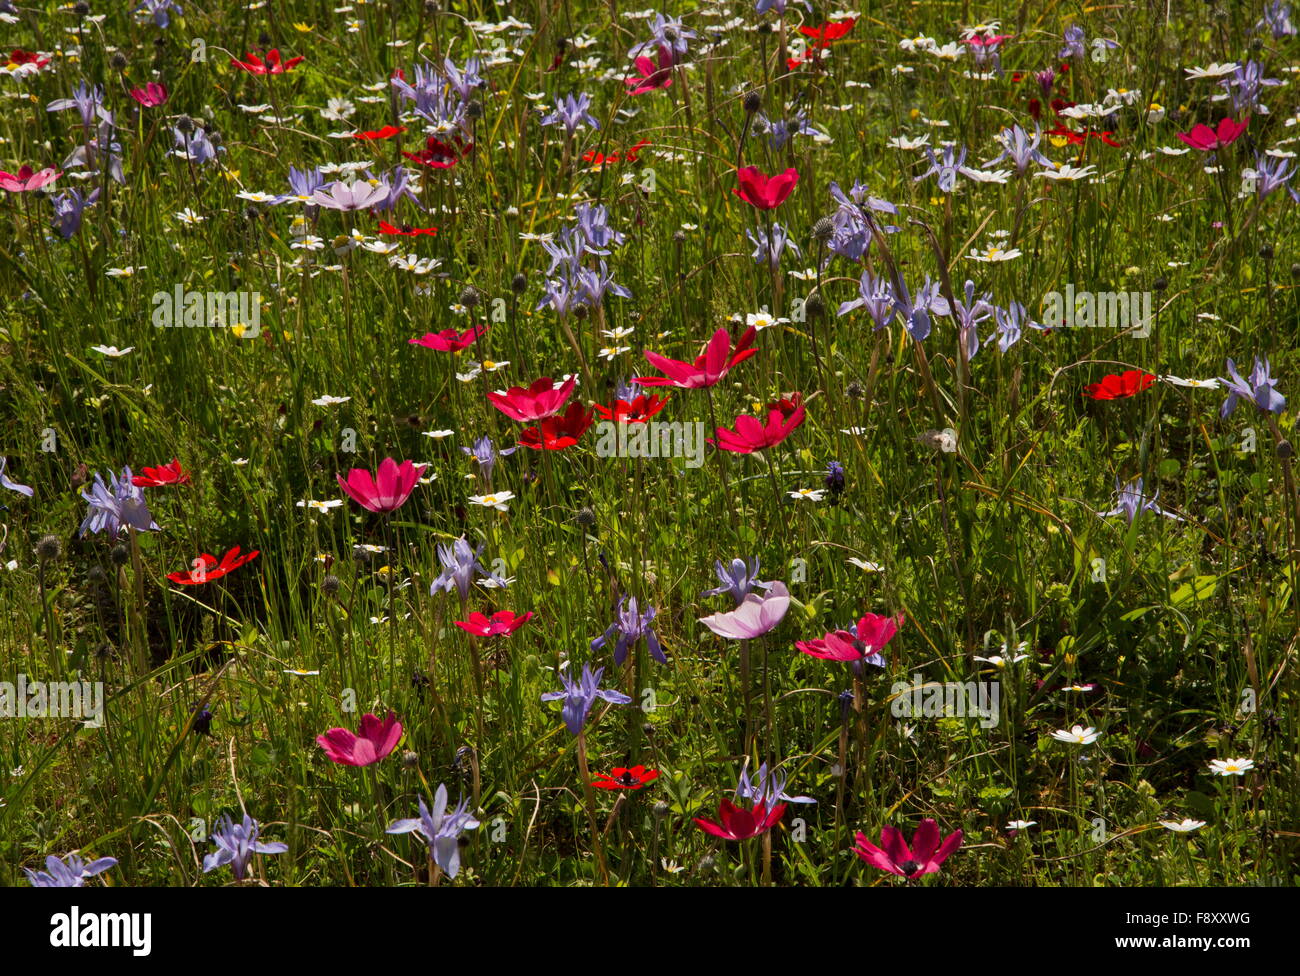 Spring flowers, mostly peacock anemones, and some Barbary Nut etc, in old olive grove, Lesvos, Greece. Stock Photo